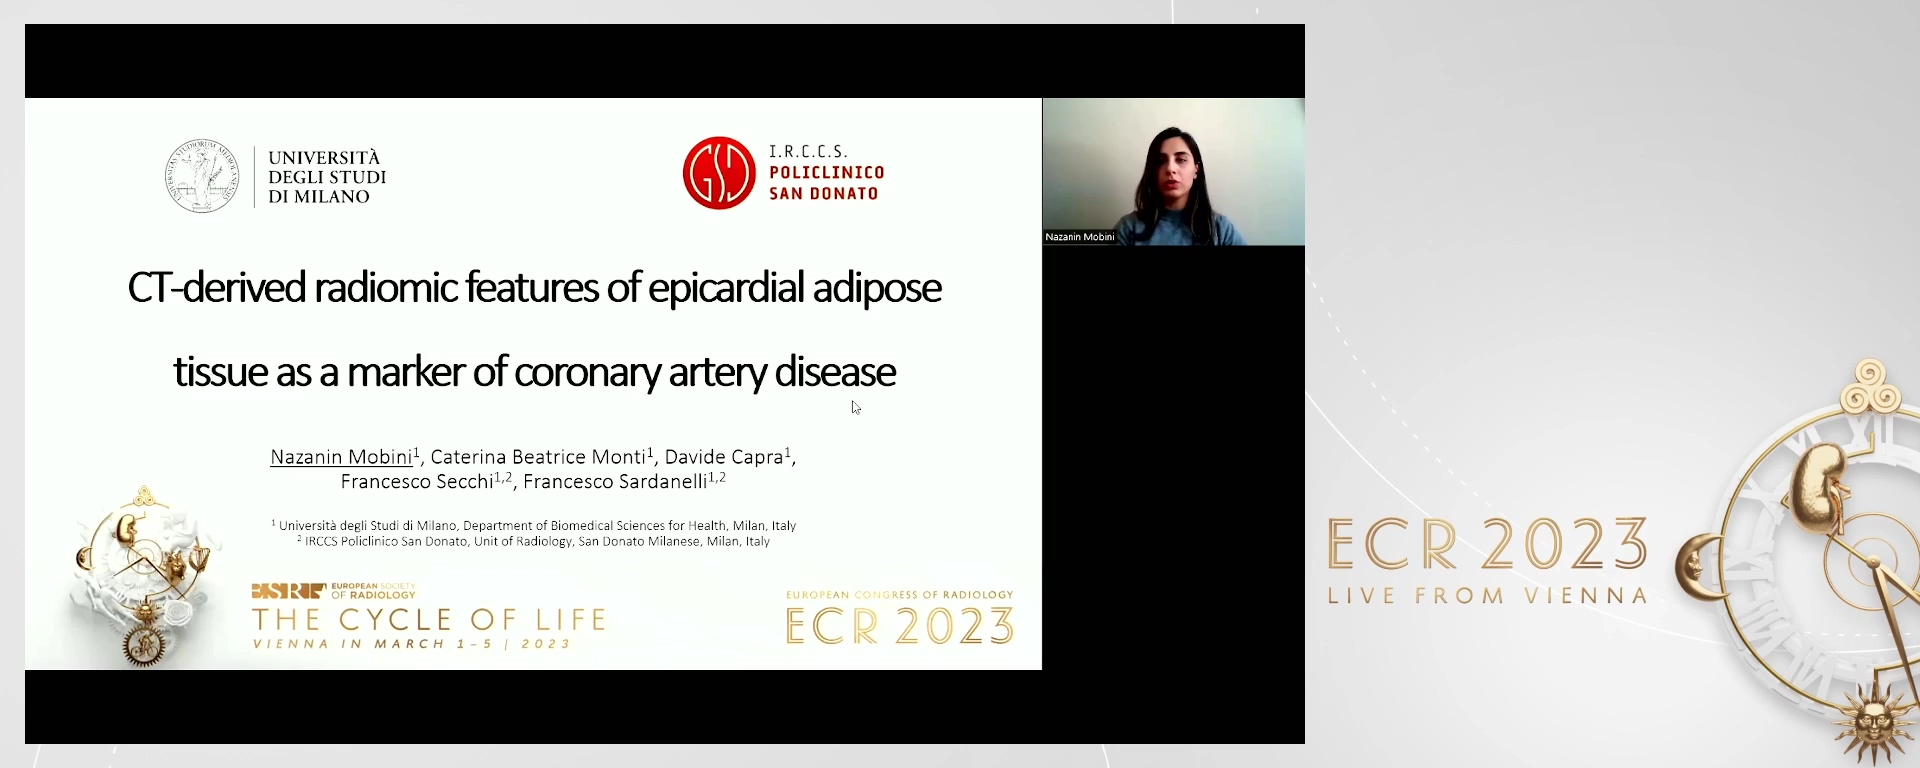 CT-derived radiomic features of epicardial adipose tissue as a marker of coronary artery disease - Nazanin  Mobini, Milan / IT